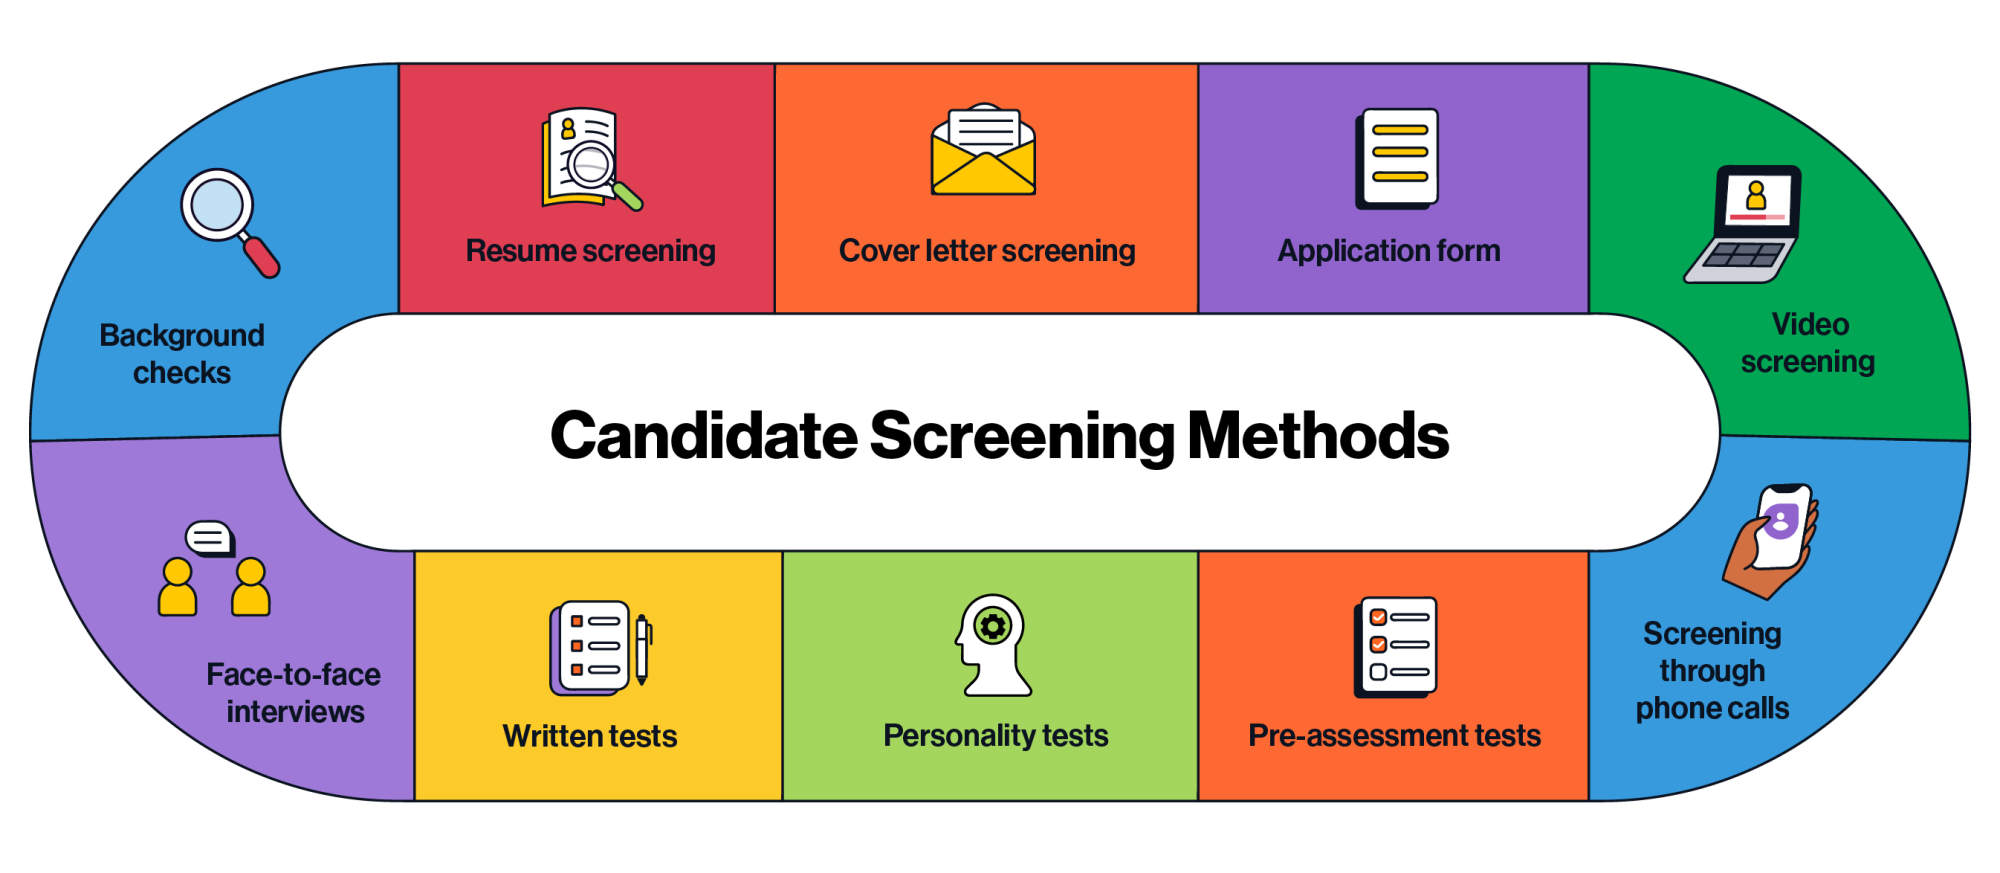 An organization's recruitment process should involve many different data sources, including a social media background check, to paint an accurate picture of job seekers.